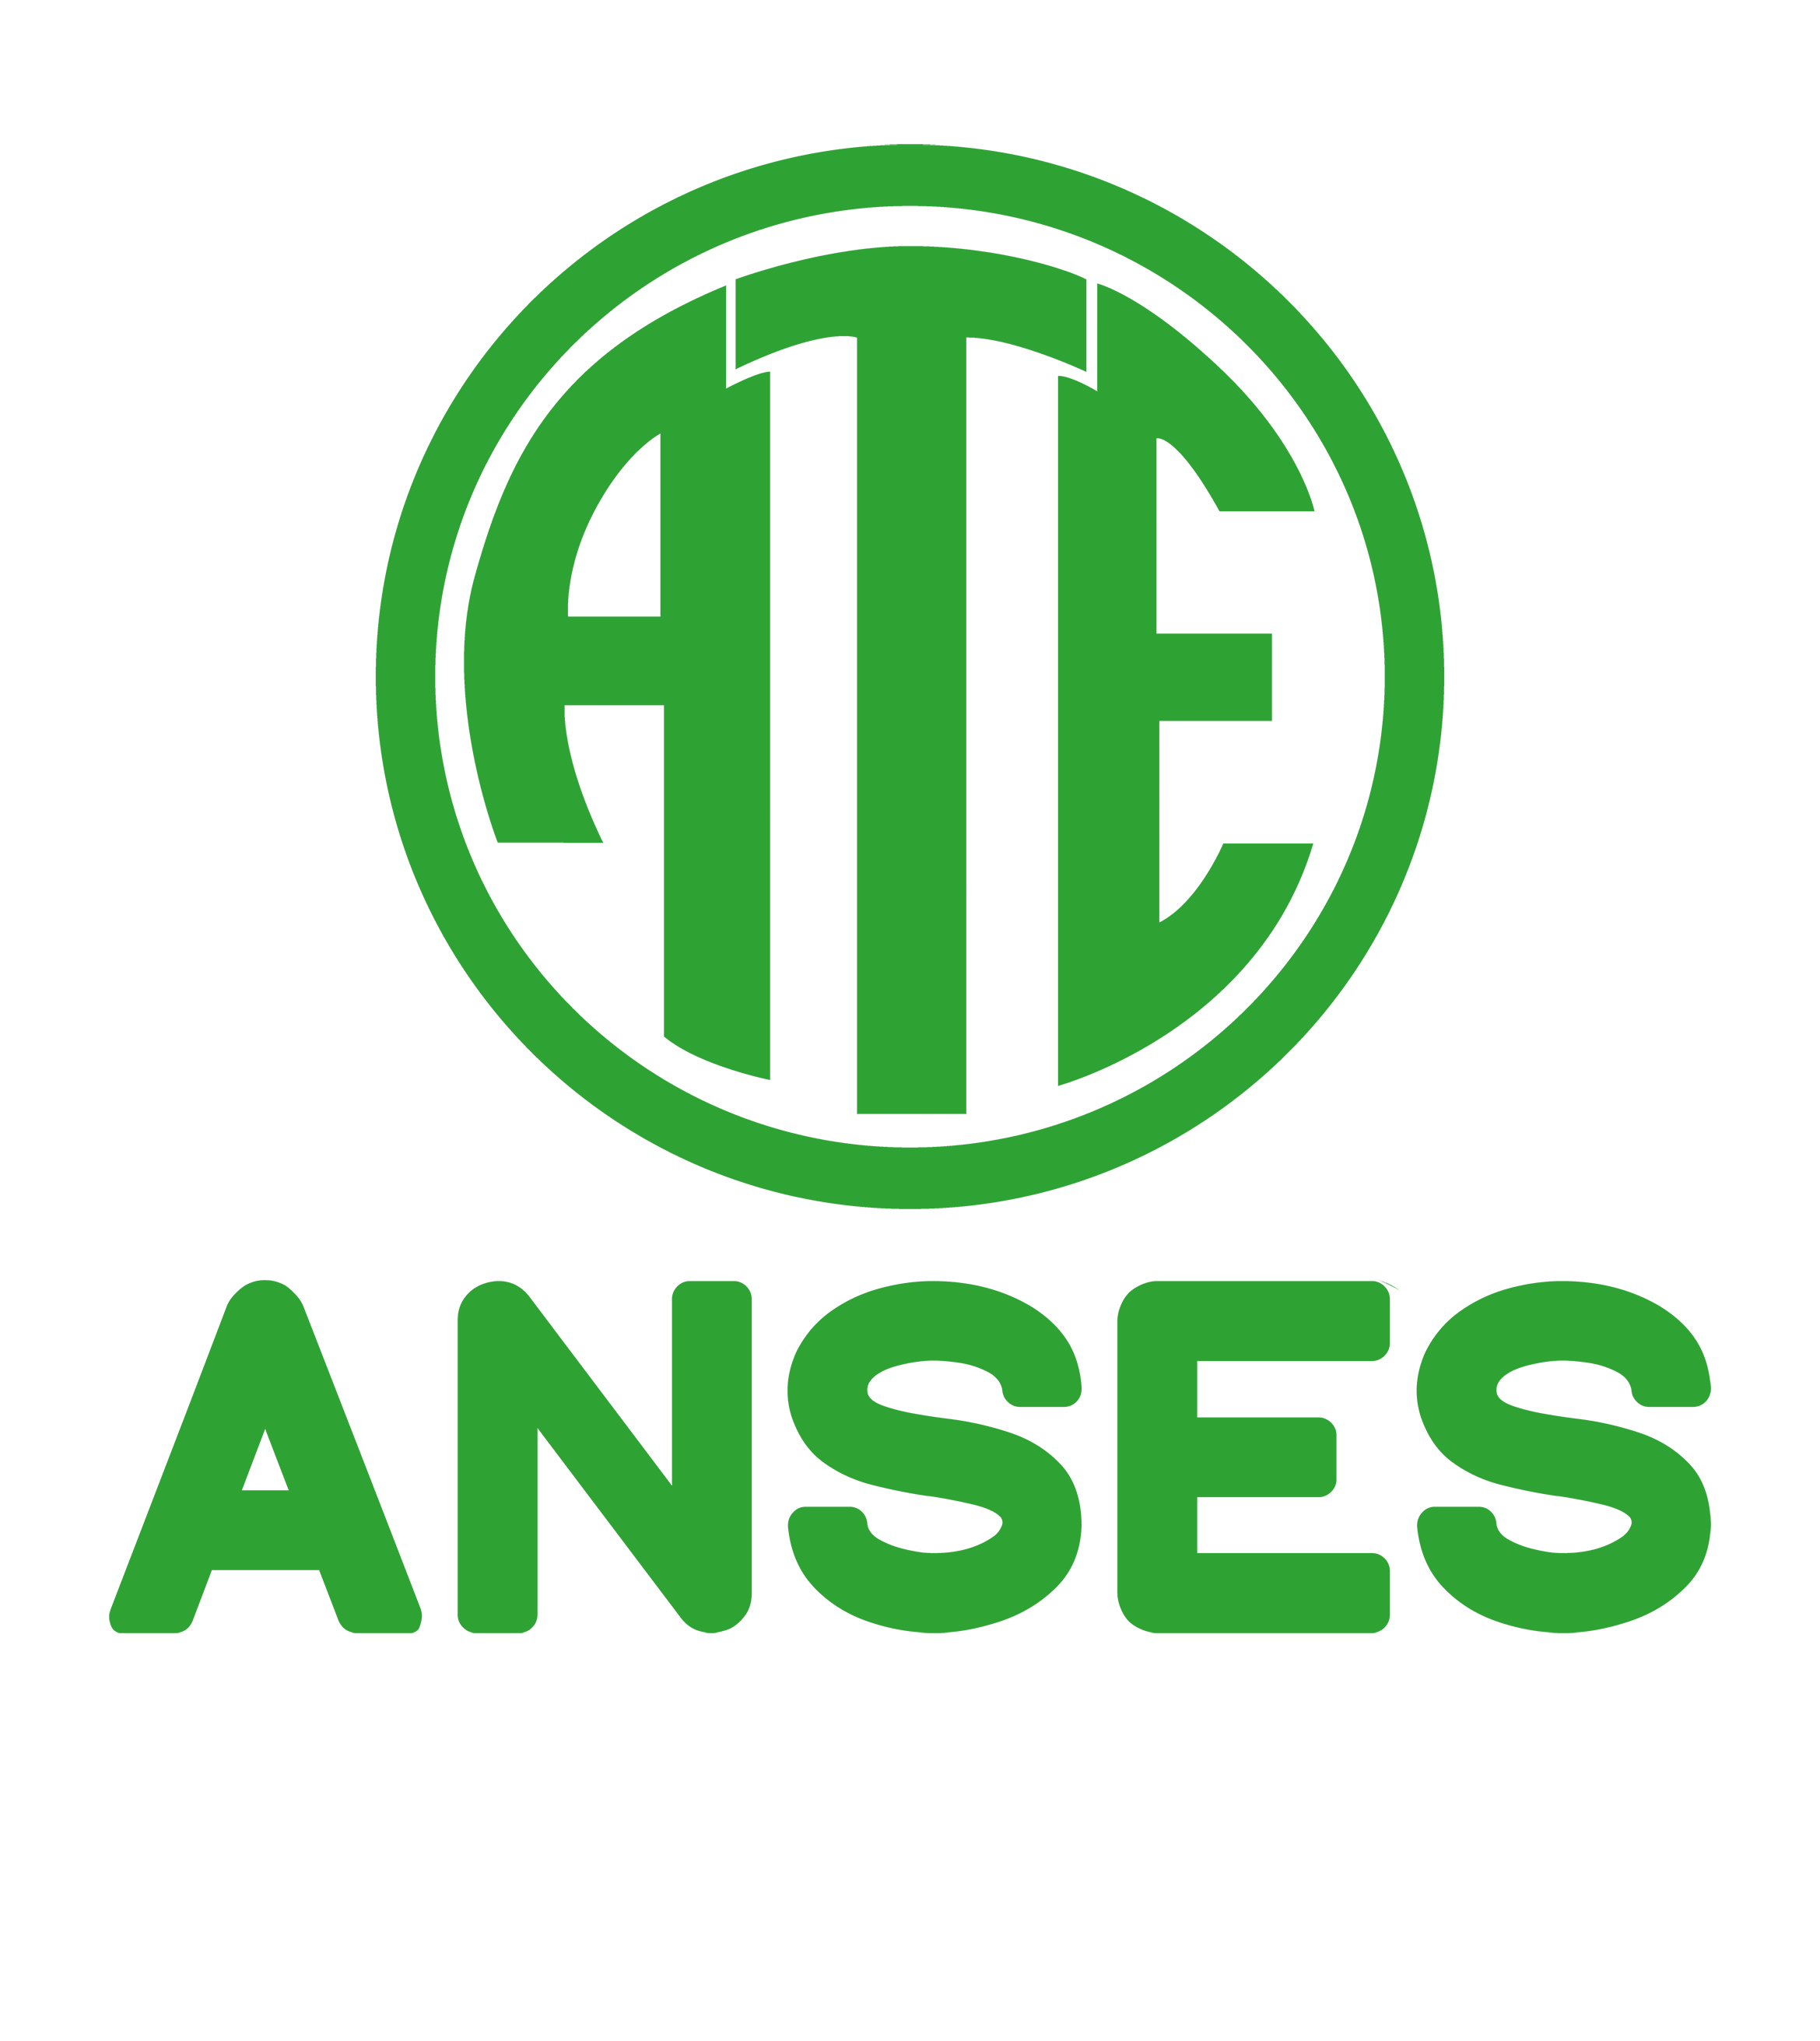 ATE ANSES